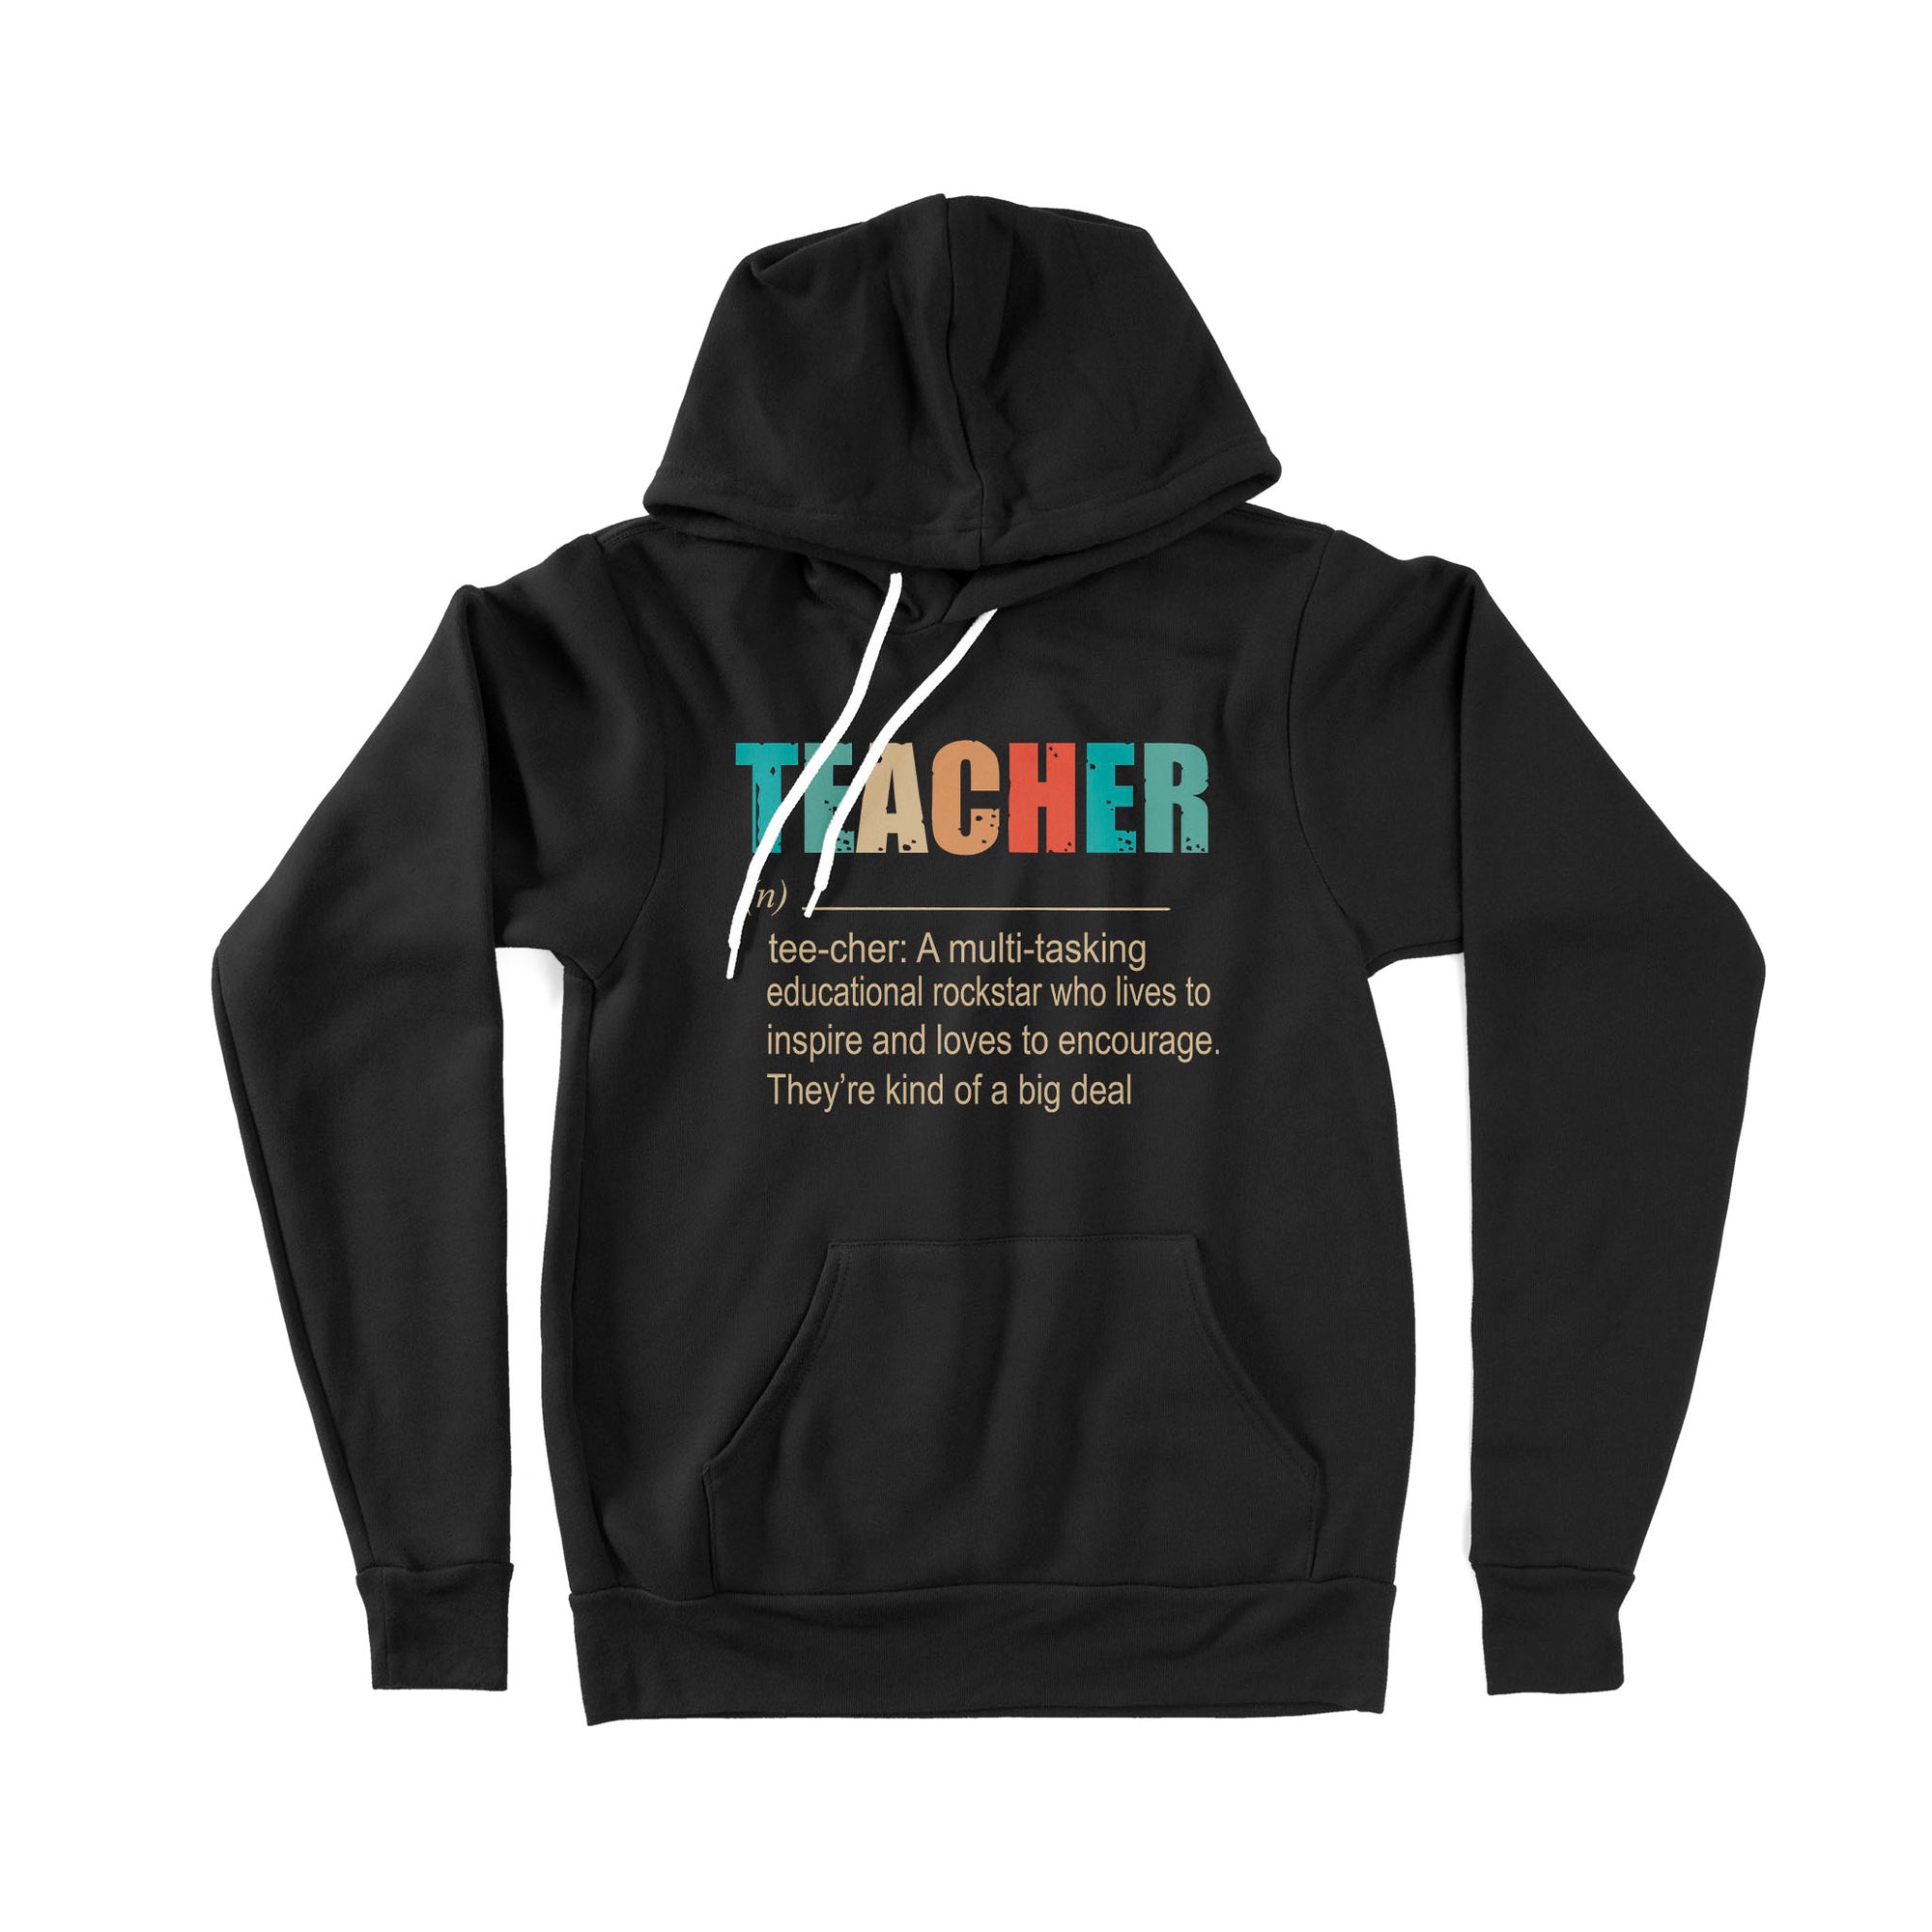 Teacher A Multitasking Educational Rockstar Who Lives To Inspire Ang Loves To Encourage They’re Kind Of A Big Deal - Premium Hoodie